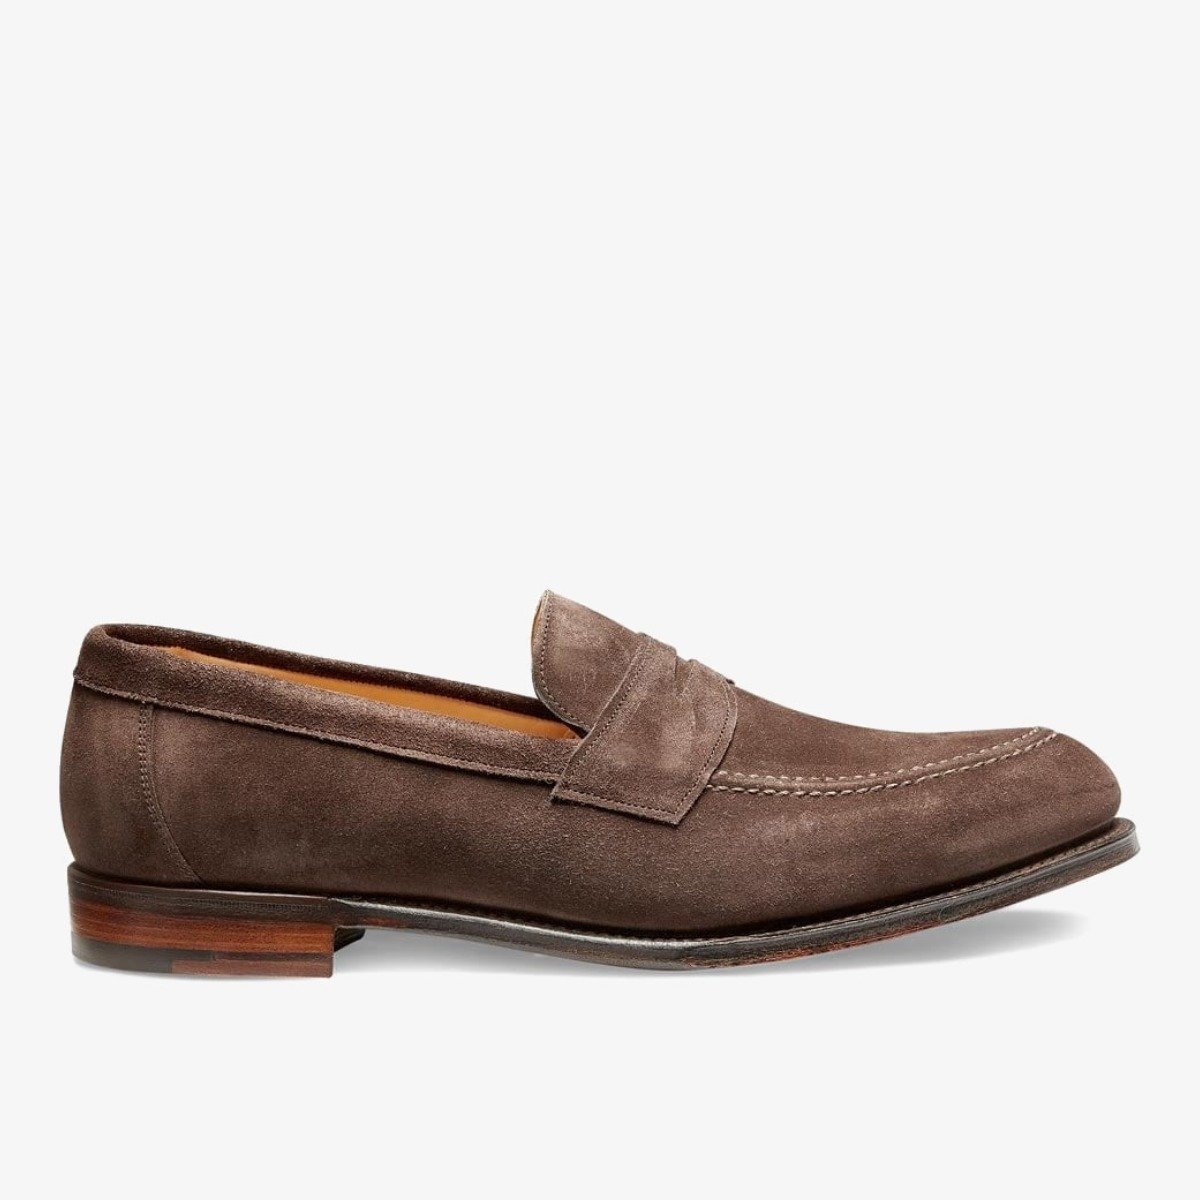 Cheaney Hadley brown suede men's penny loafers